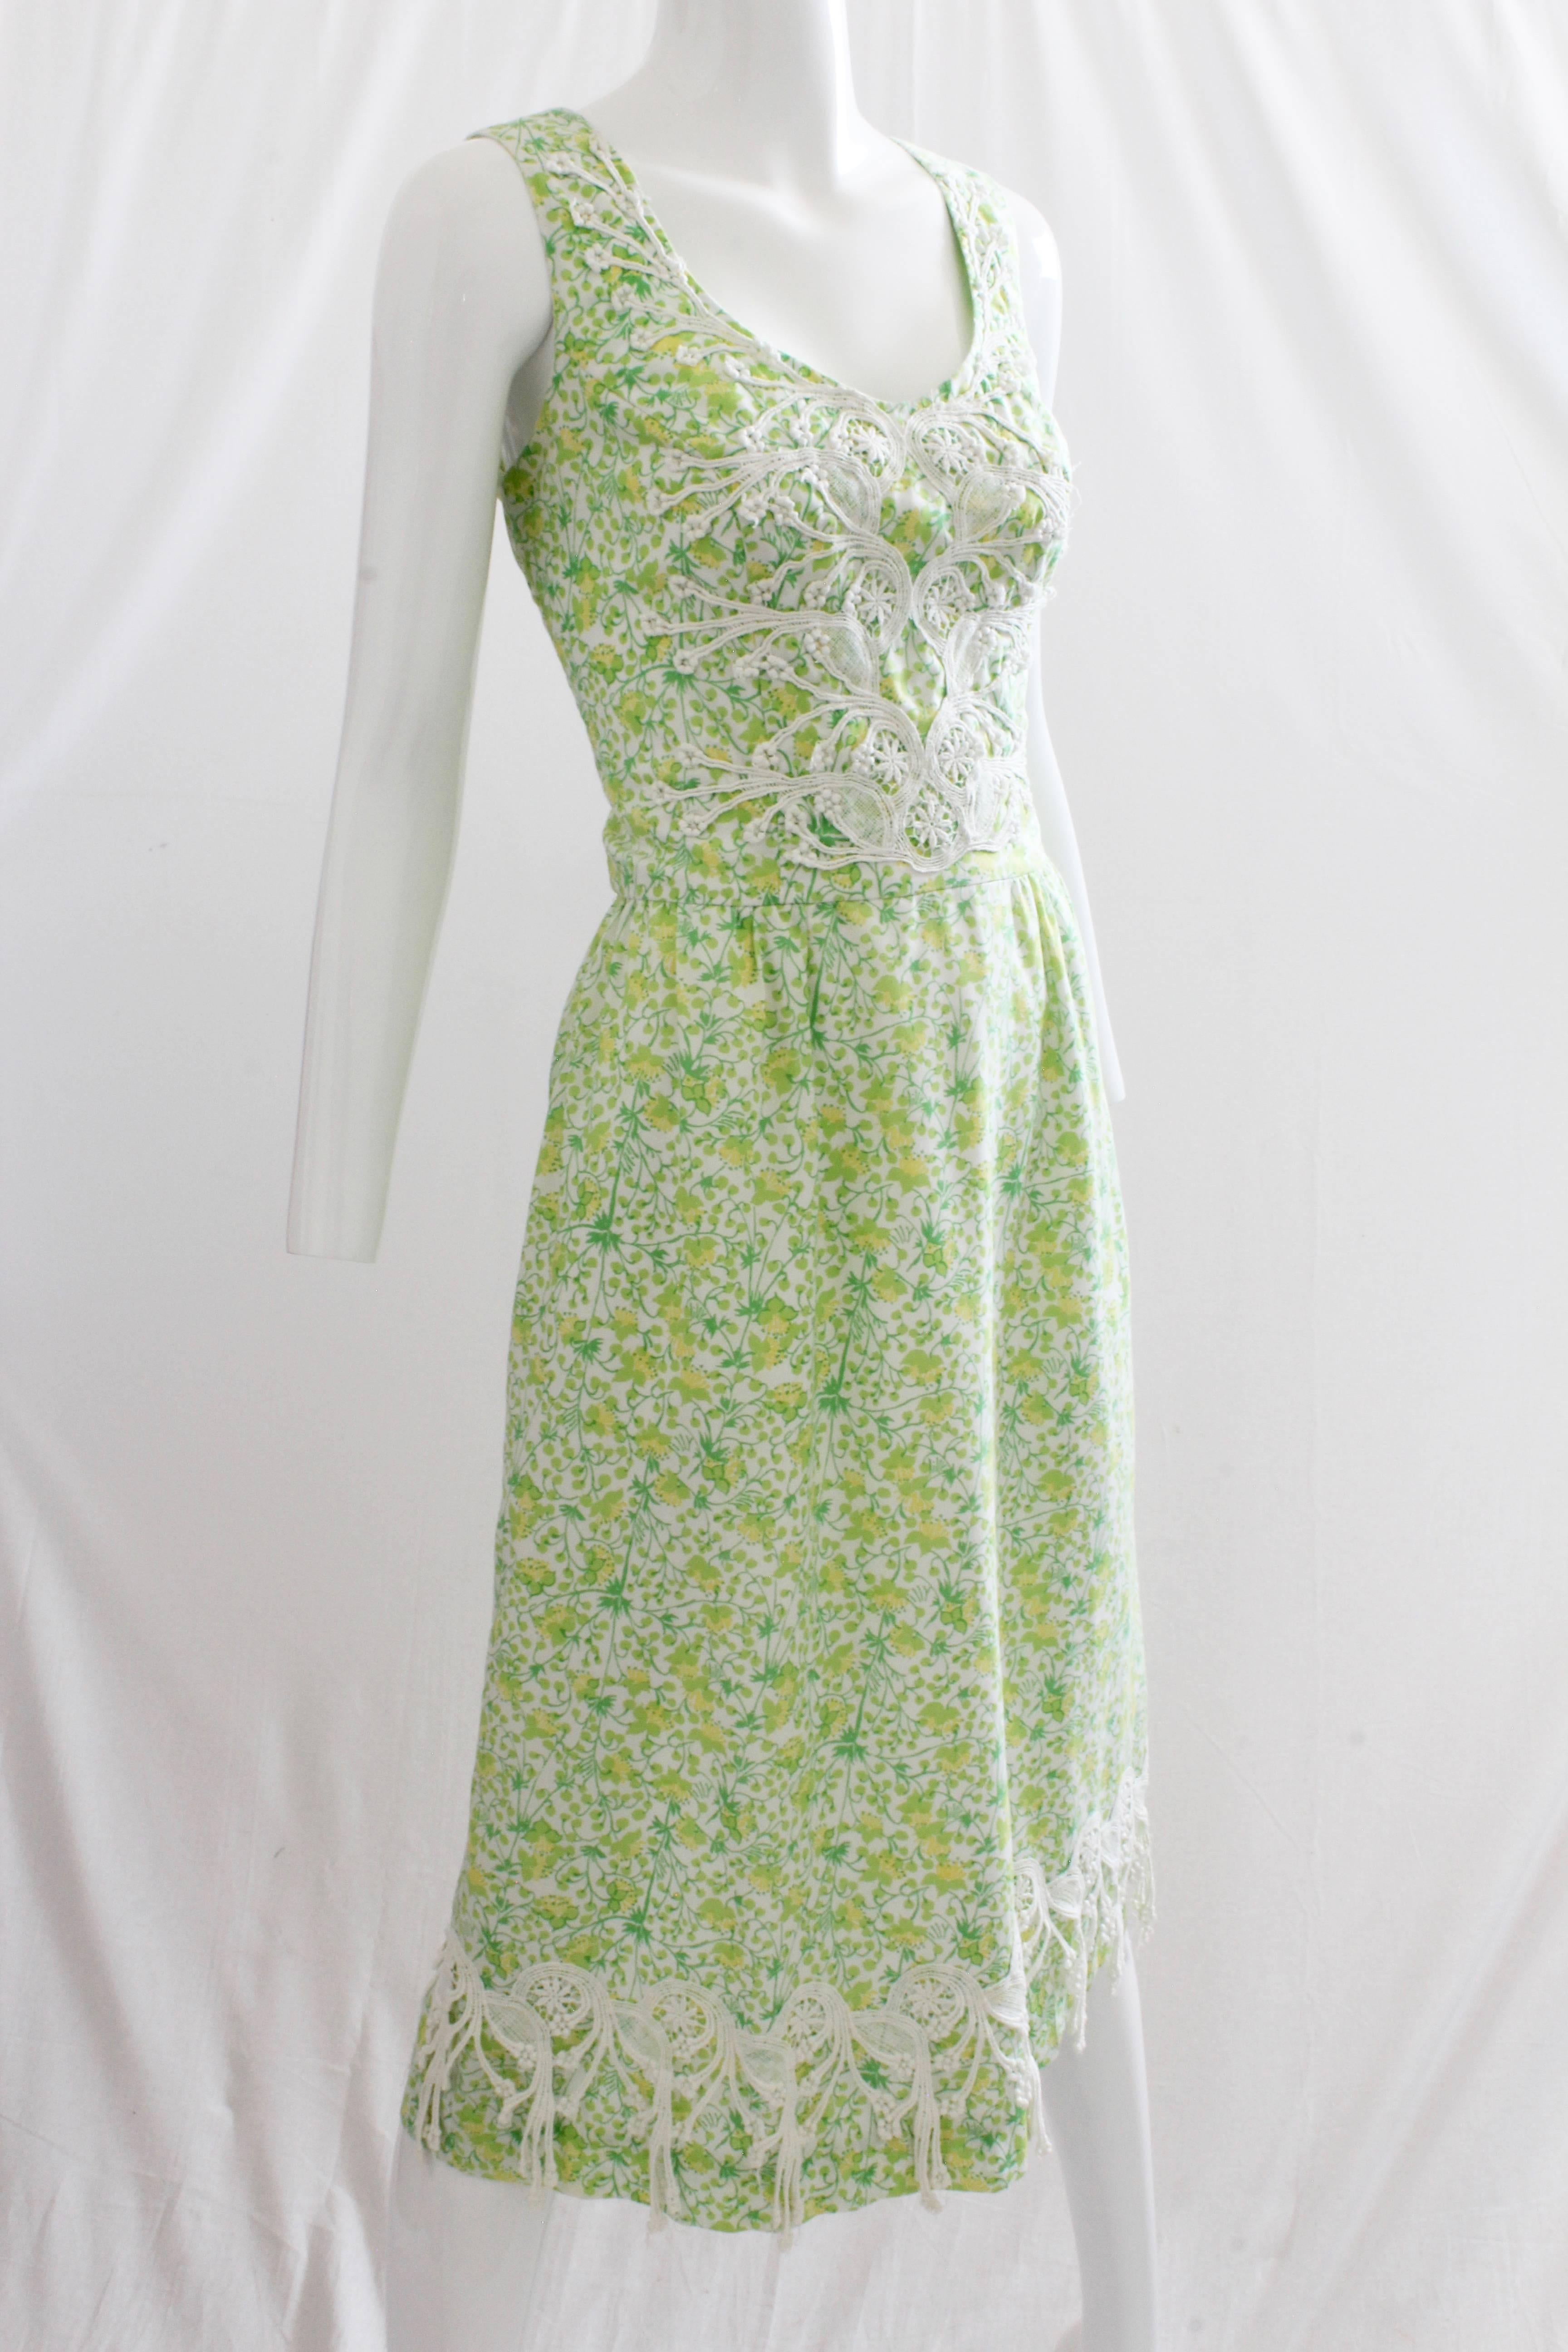 This lovely dress was made by Lilly Pulitzer, most likely in the early 1970s. Made from cotton floral print fabric in shades of green, yellow and white, this dress features a cinched waist, a white lace-covered bodice and a white lace hanging trim